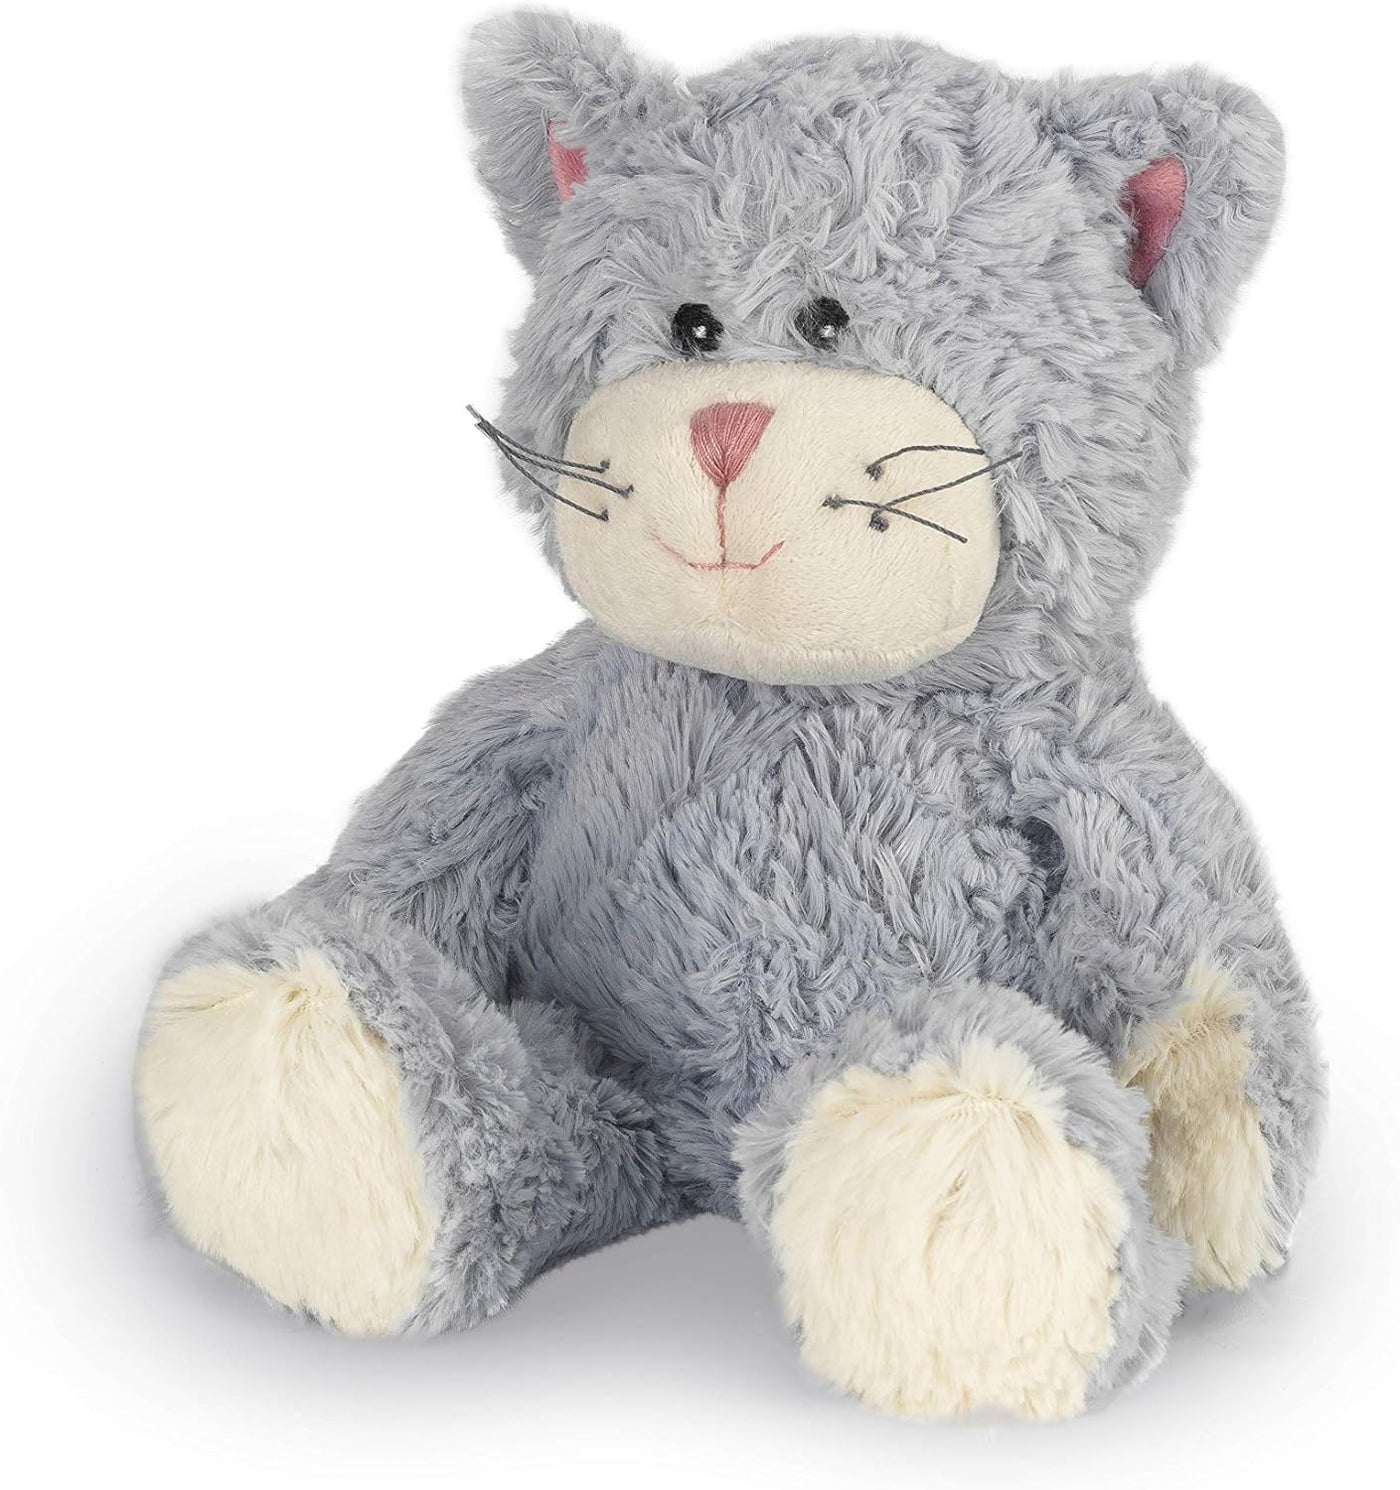 Warmies Microwavable Toy Microwaveable Lavender Scented Plush Cat